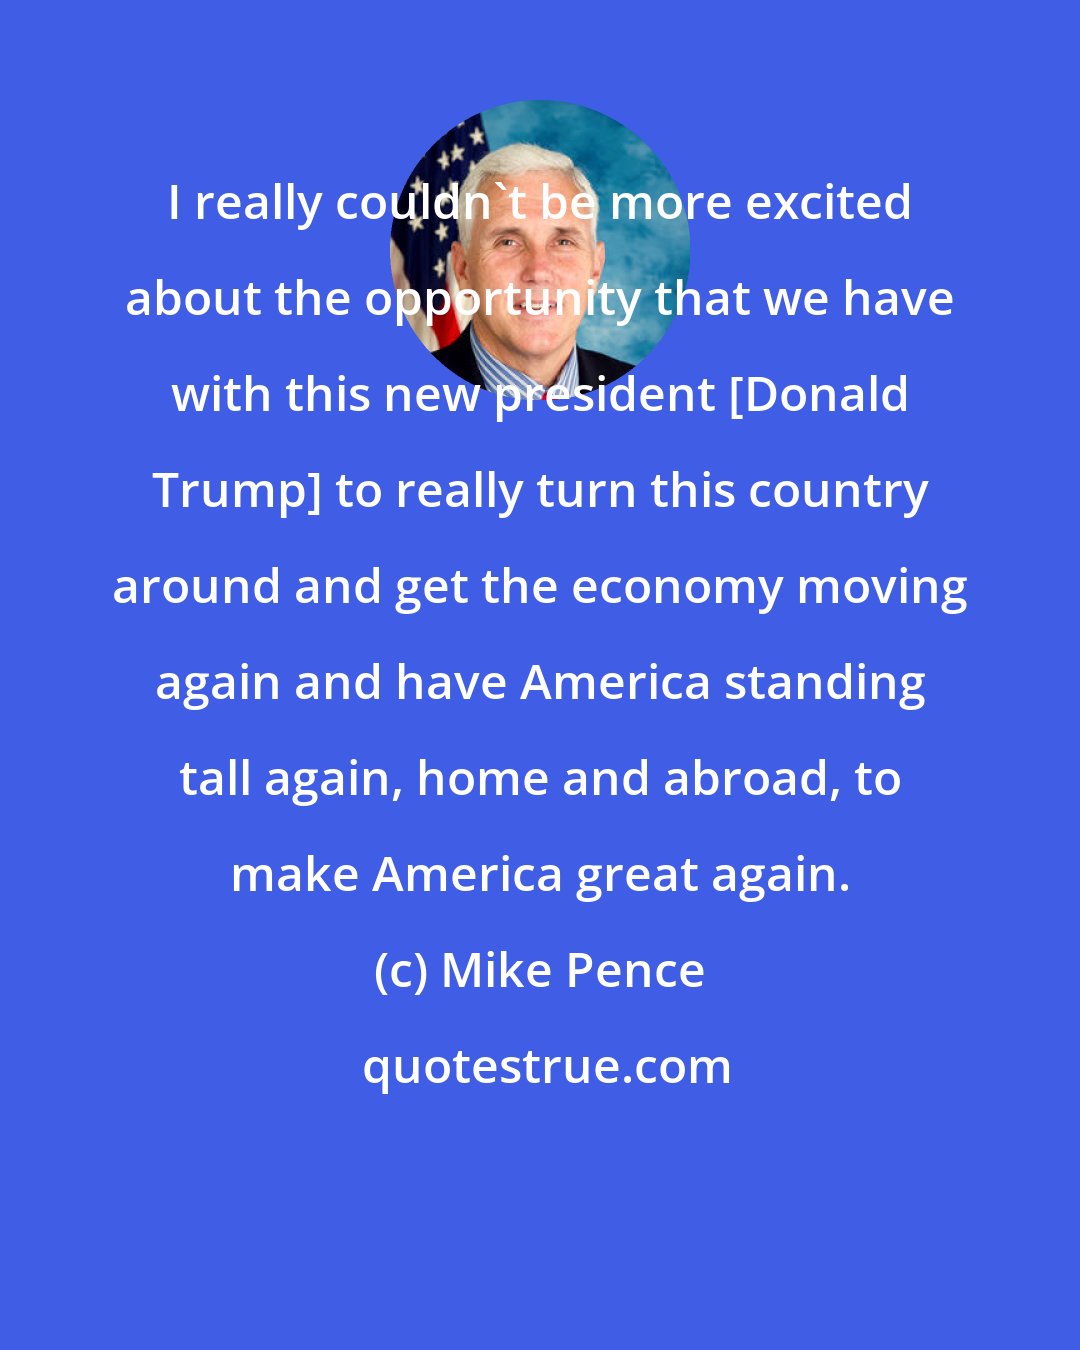 Mike Pence: I really couldn't be more excited about the opportunity that we have with this new president [Donald Trump] to really turn this country around and get the economy moving again and have America standing tall again, home and abroad, to make America great again.